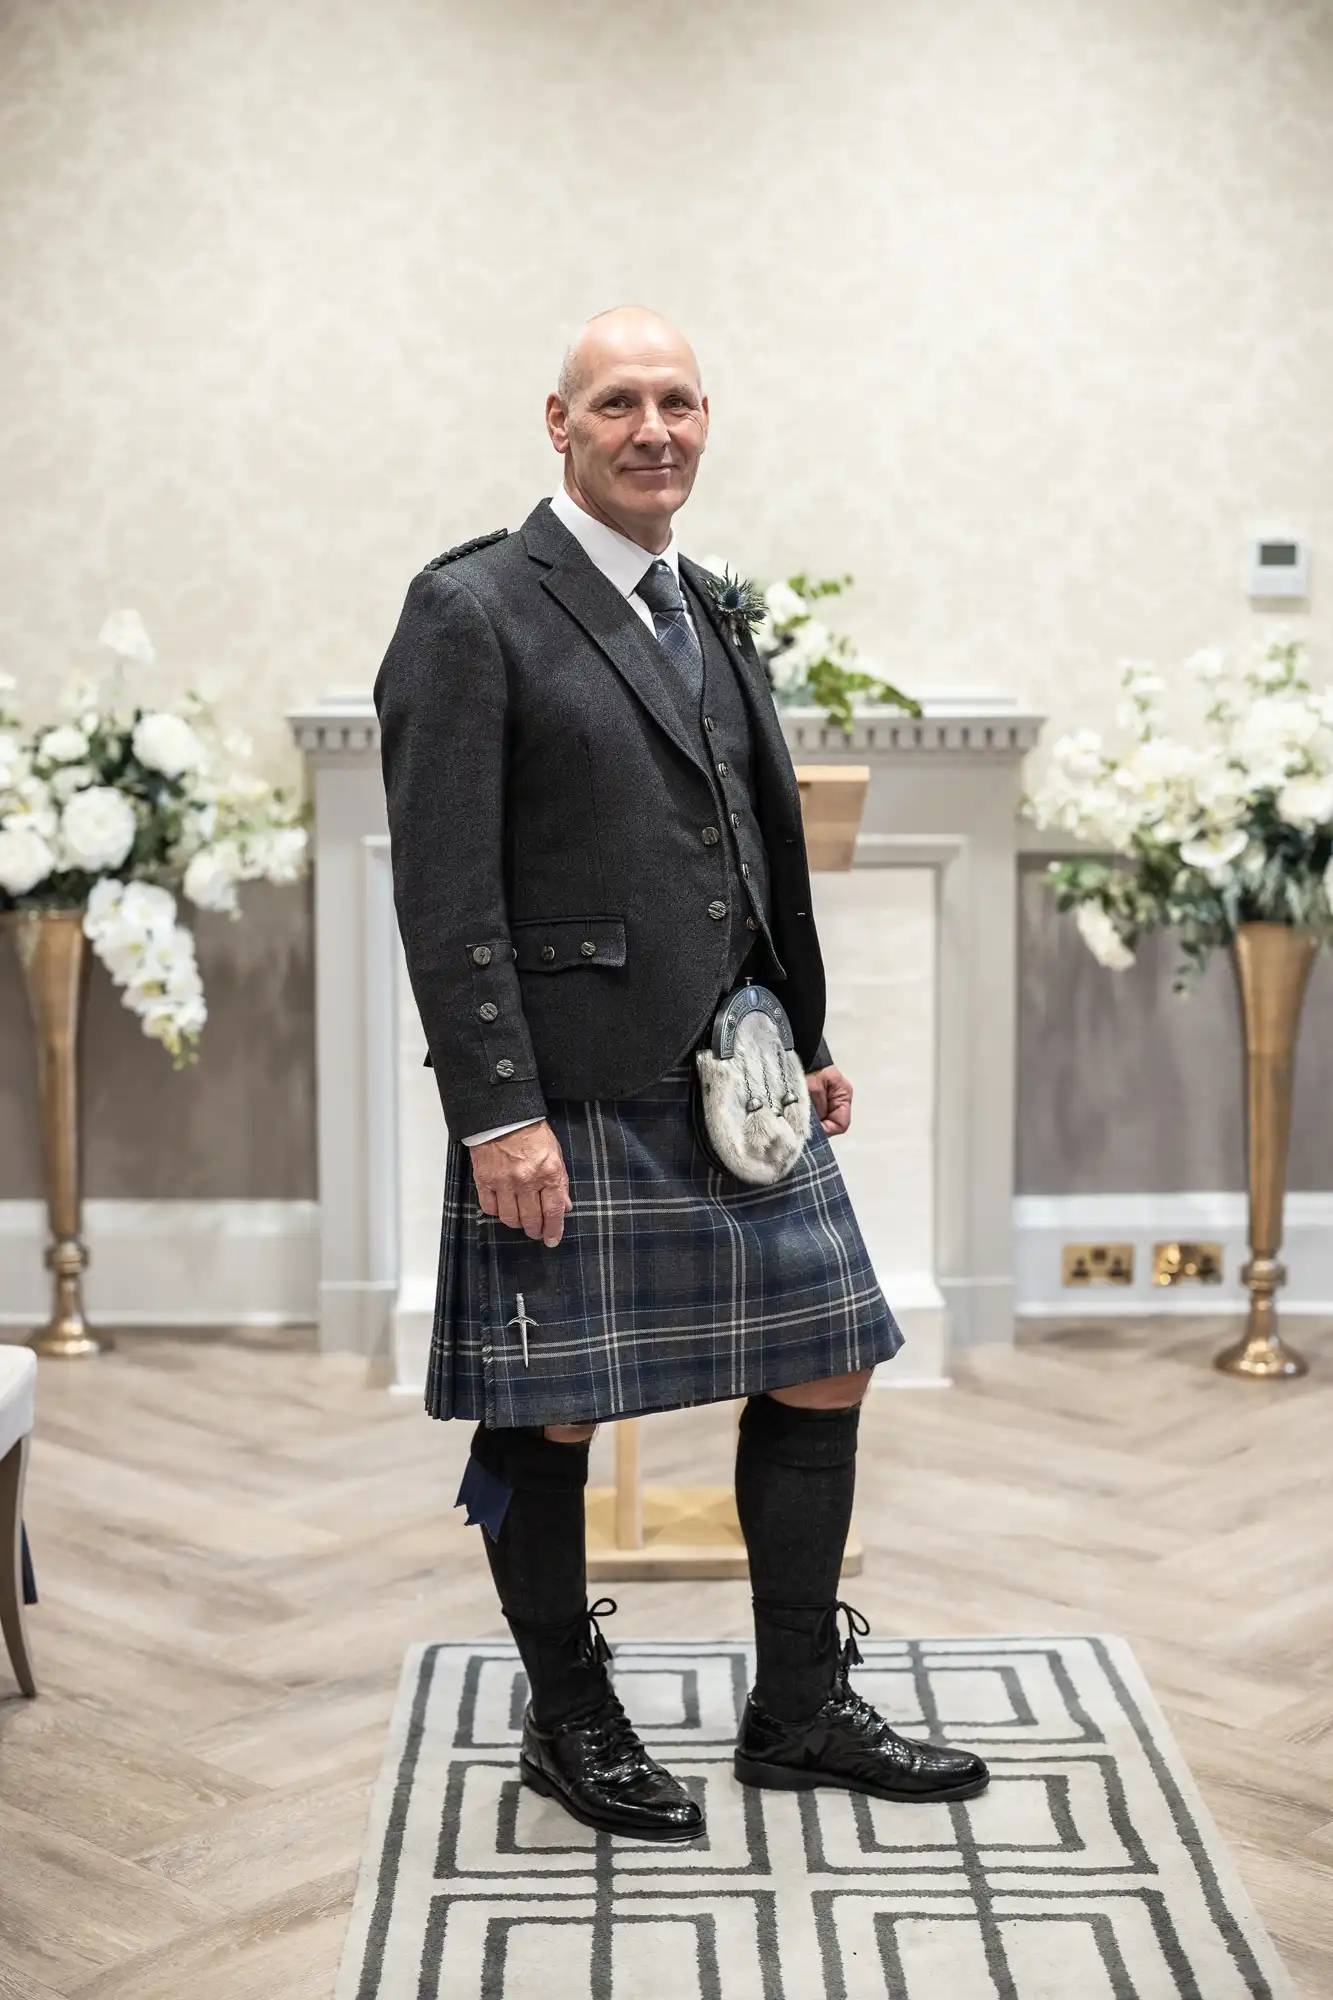 A man in formal Scottish attire, including a kilt and sporran, stands in a room with floral decorations and wood flooring.